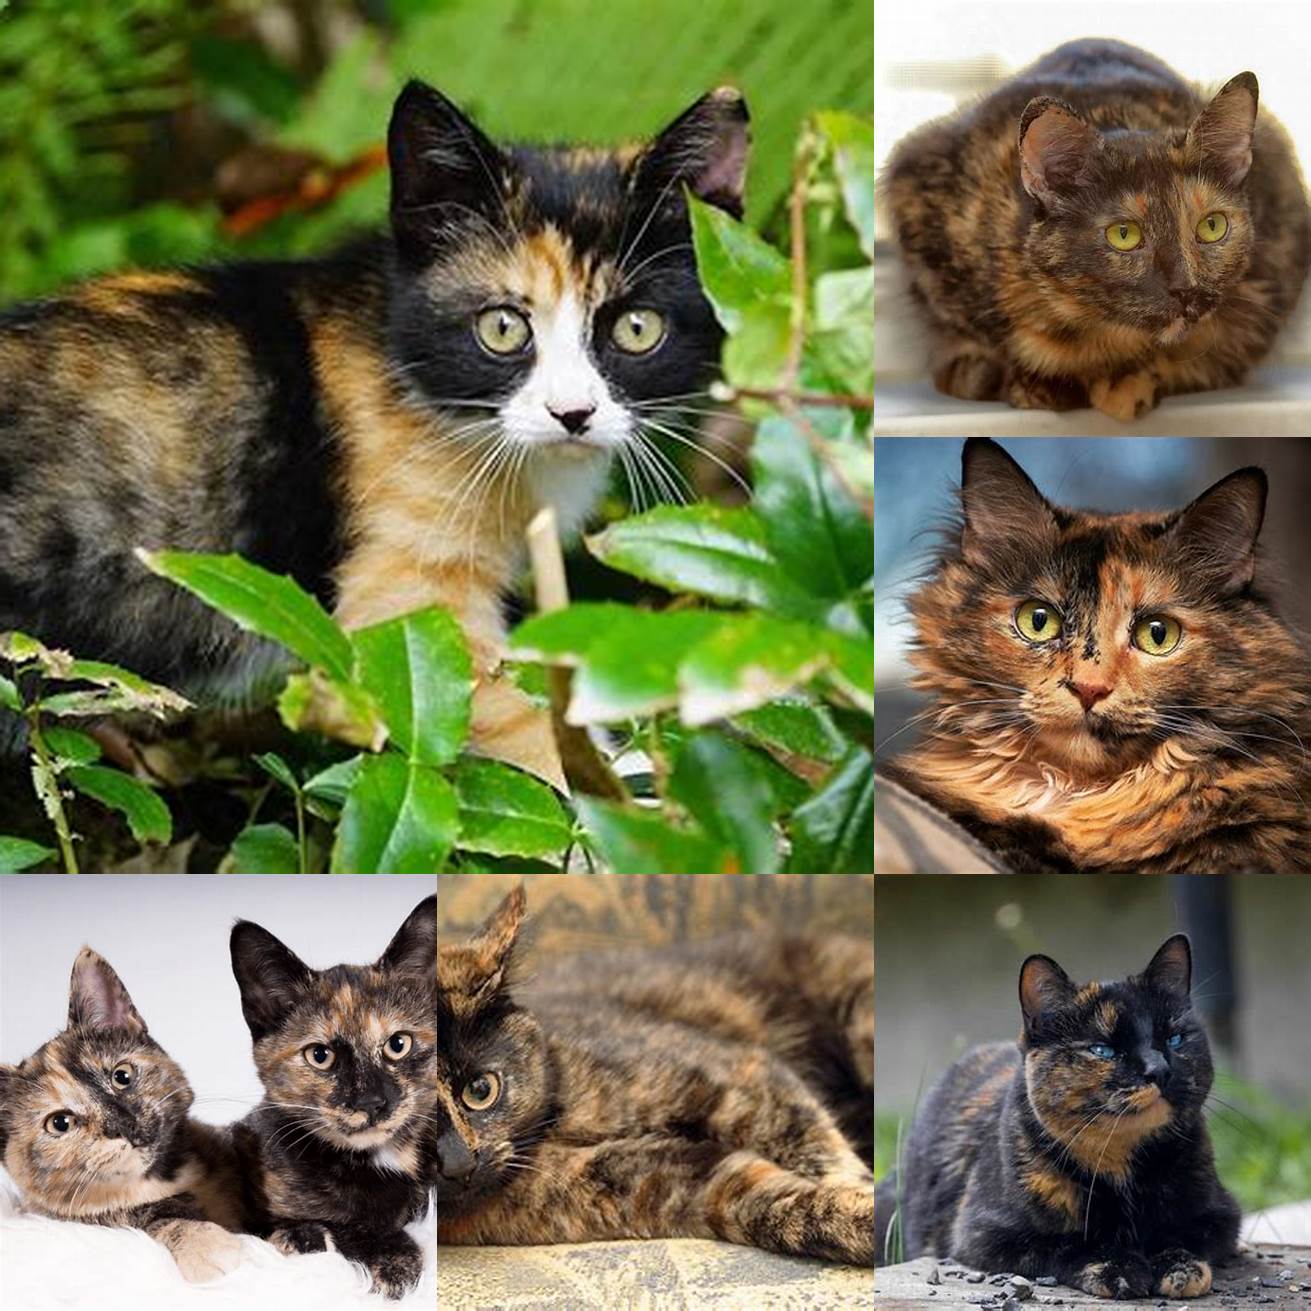 Tortoiseshell cats may have a unique personality